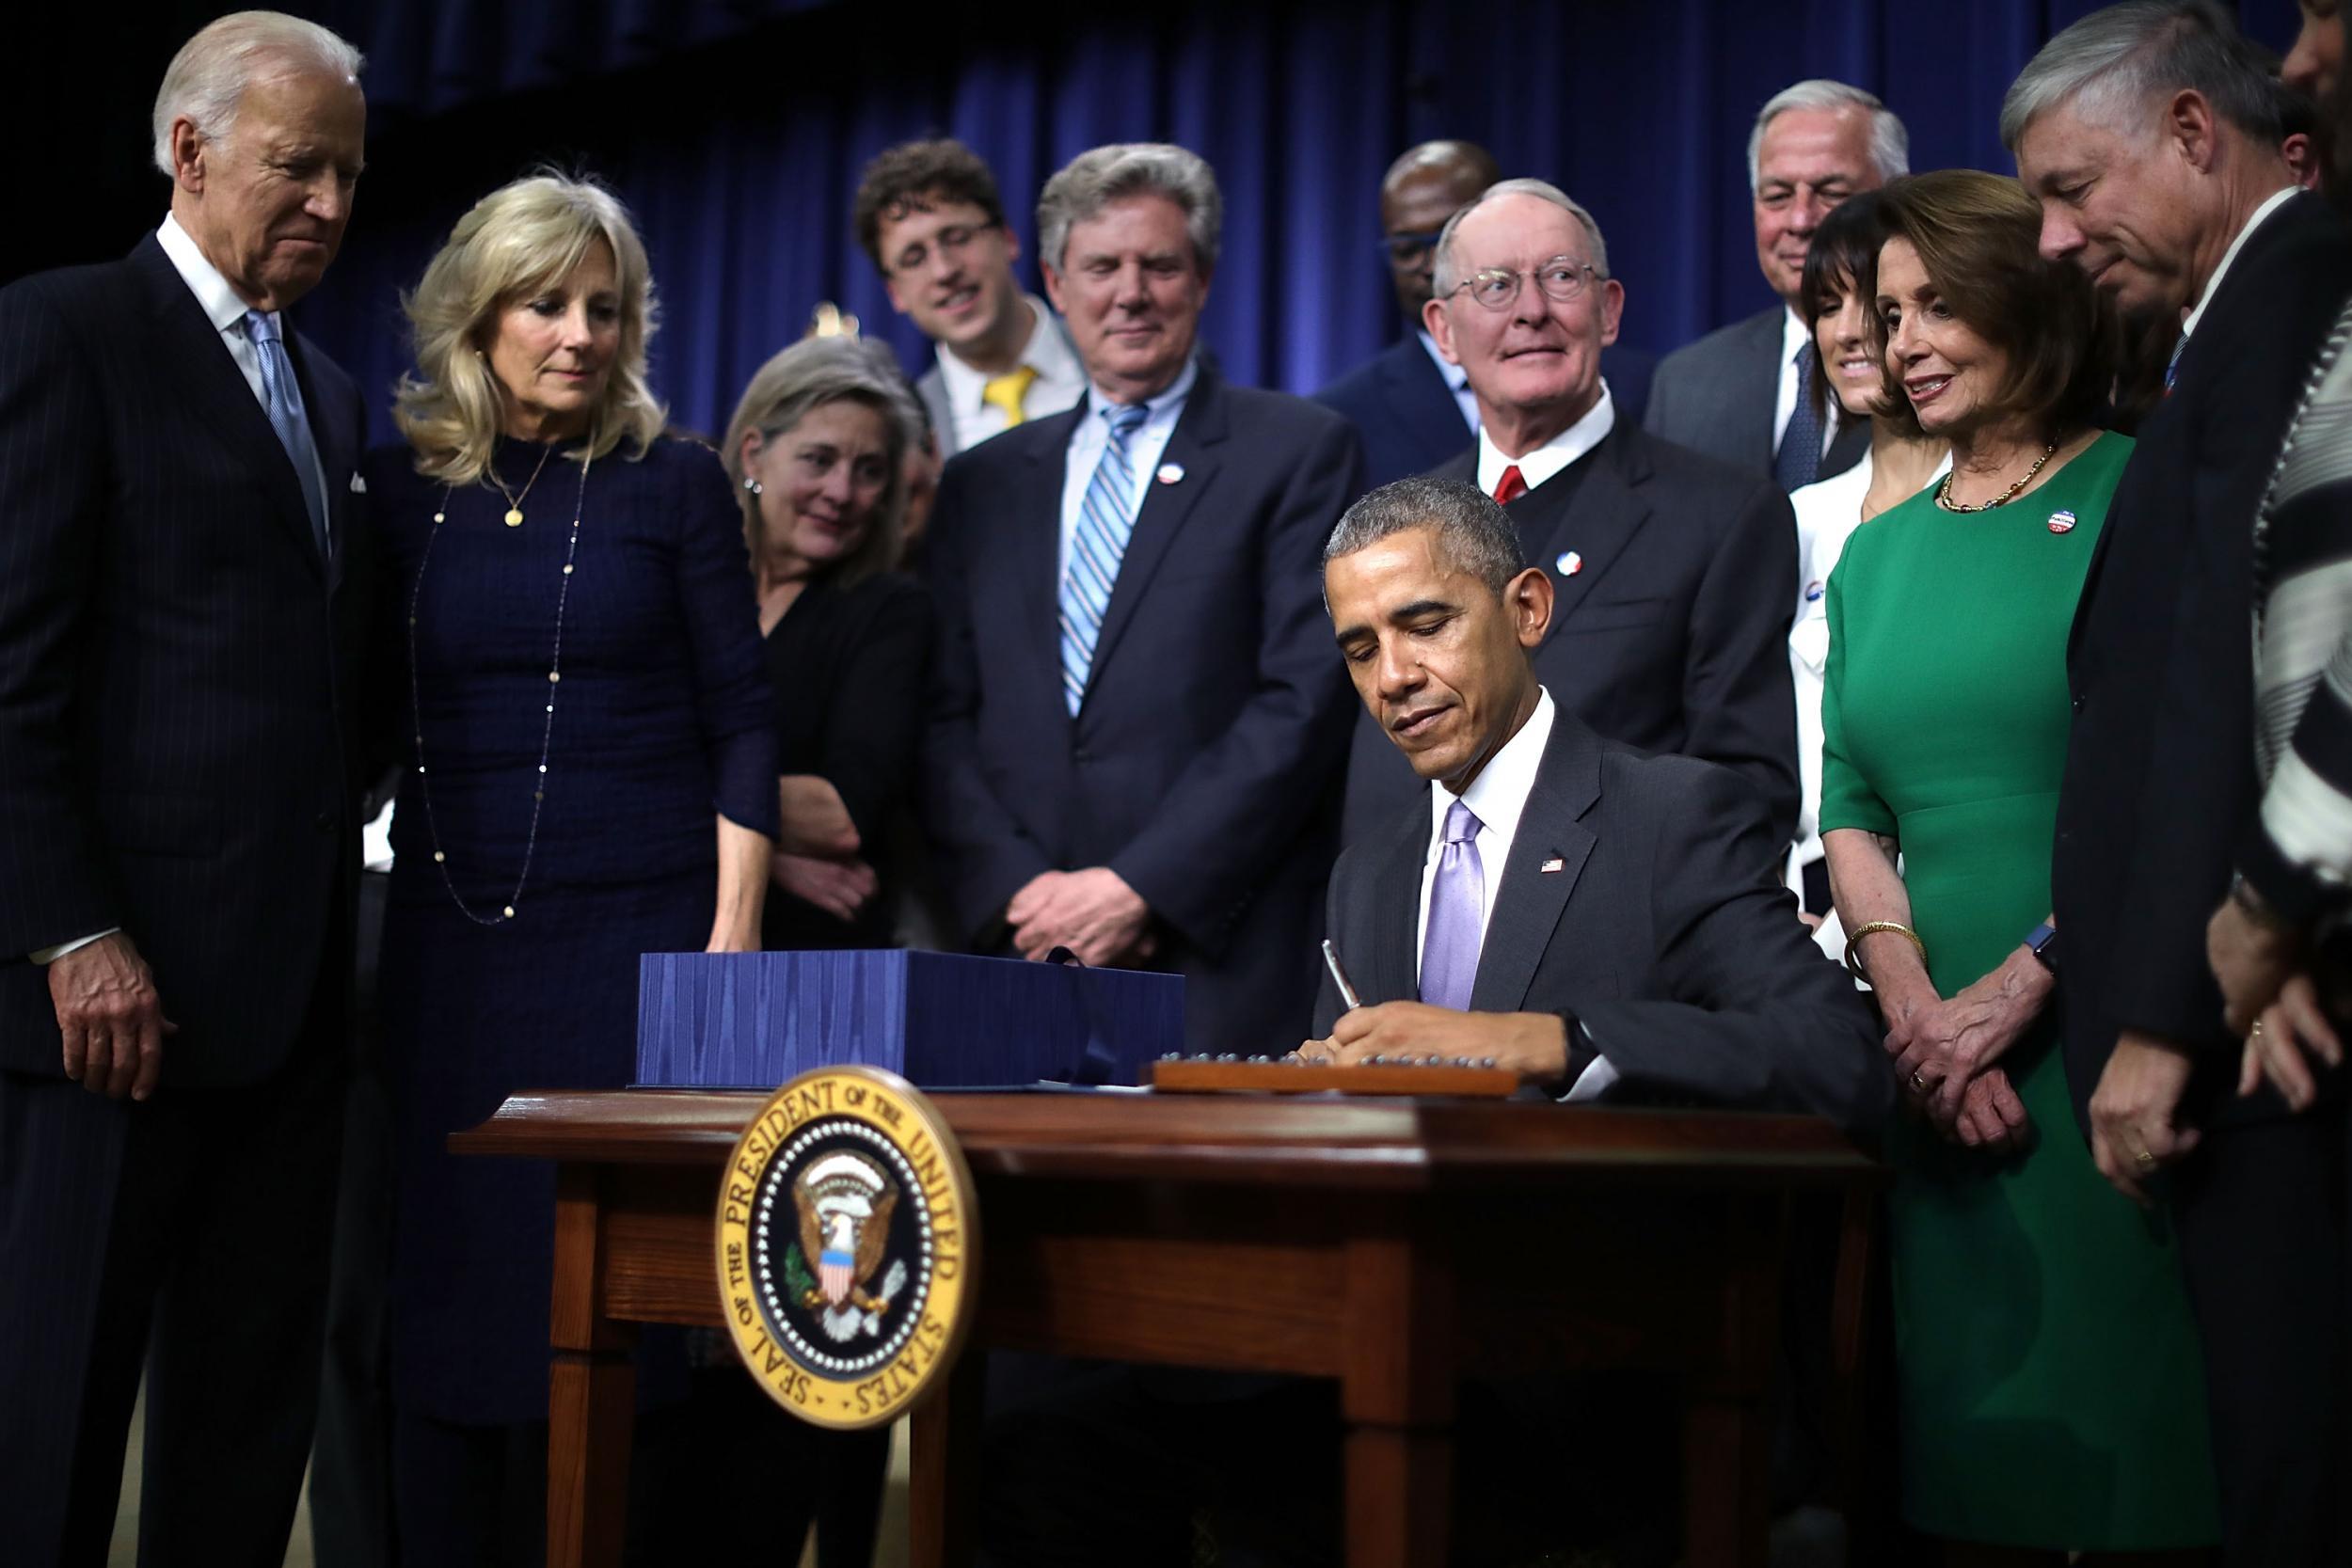 Barack Obama signed the 21st Century Cures Act into law this week